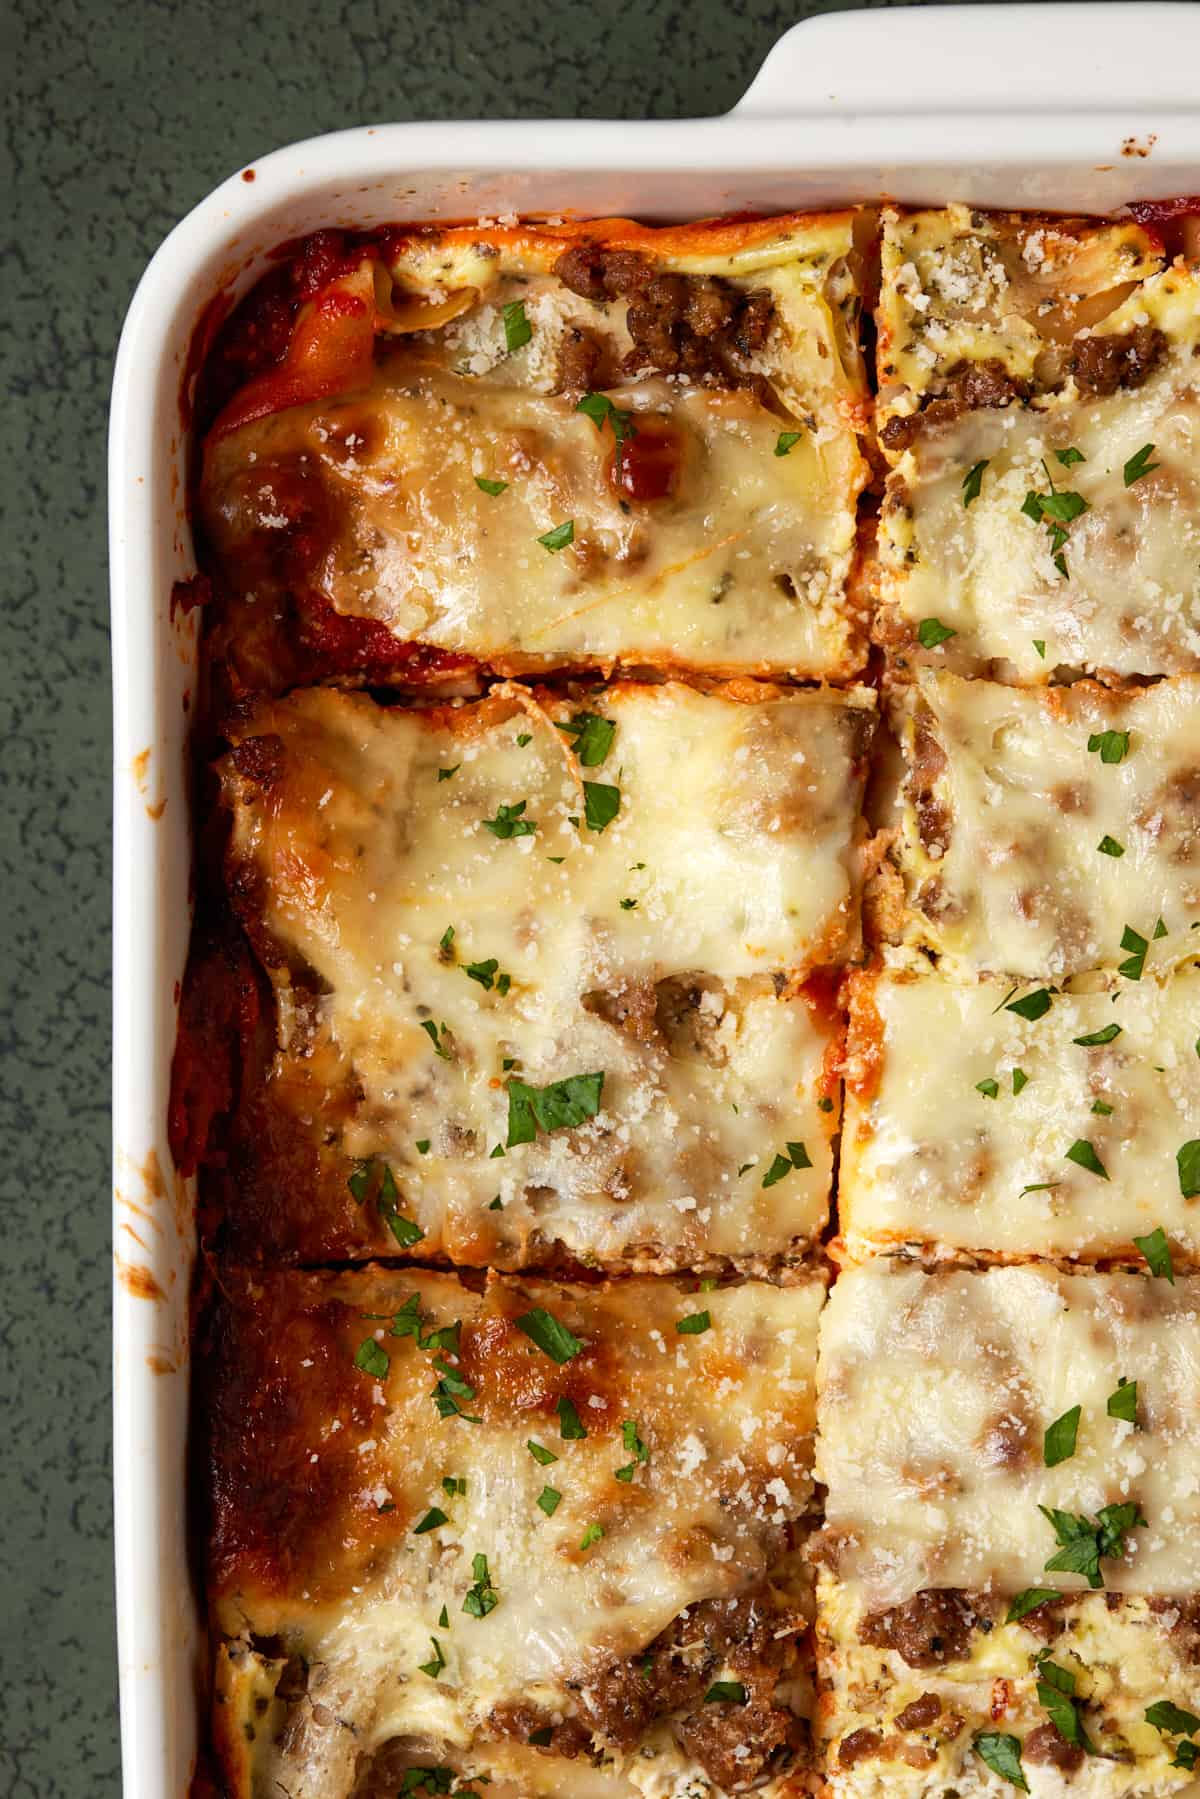 Baked lasagna in white dish.